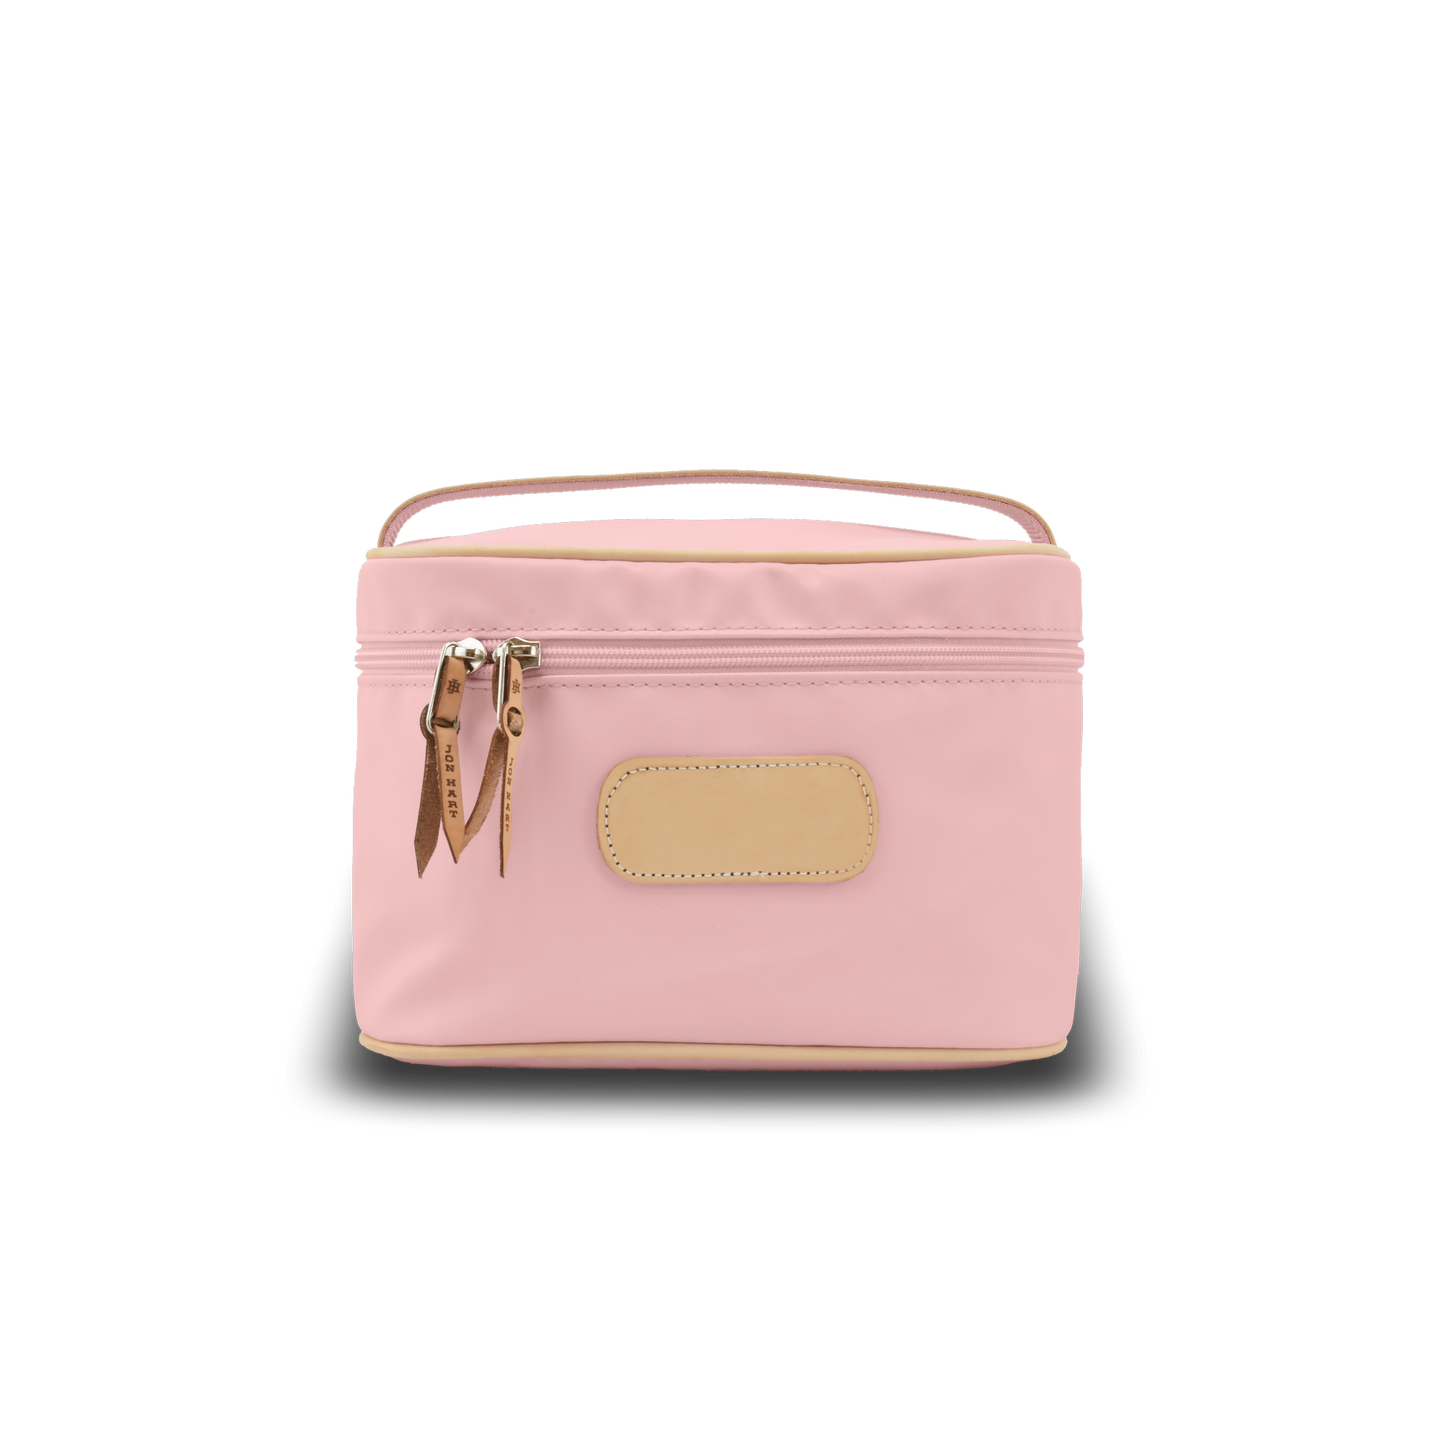 Makeup Case - Rose Coated Canvas Front Angle in Color 'Rose Coated Canvas'